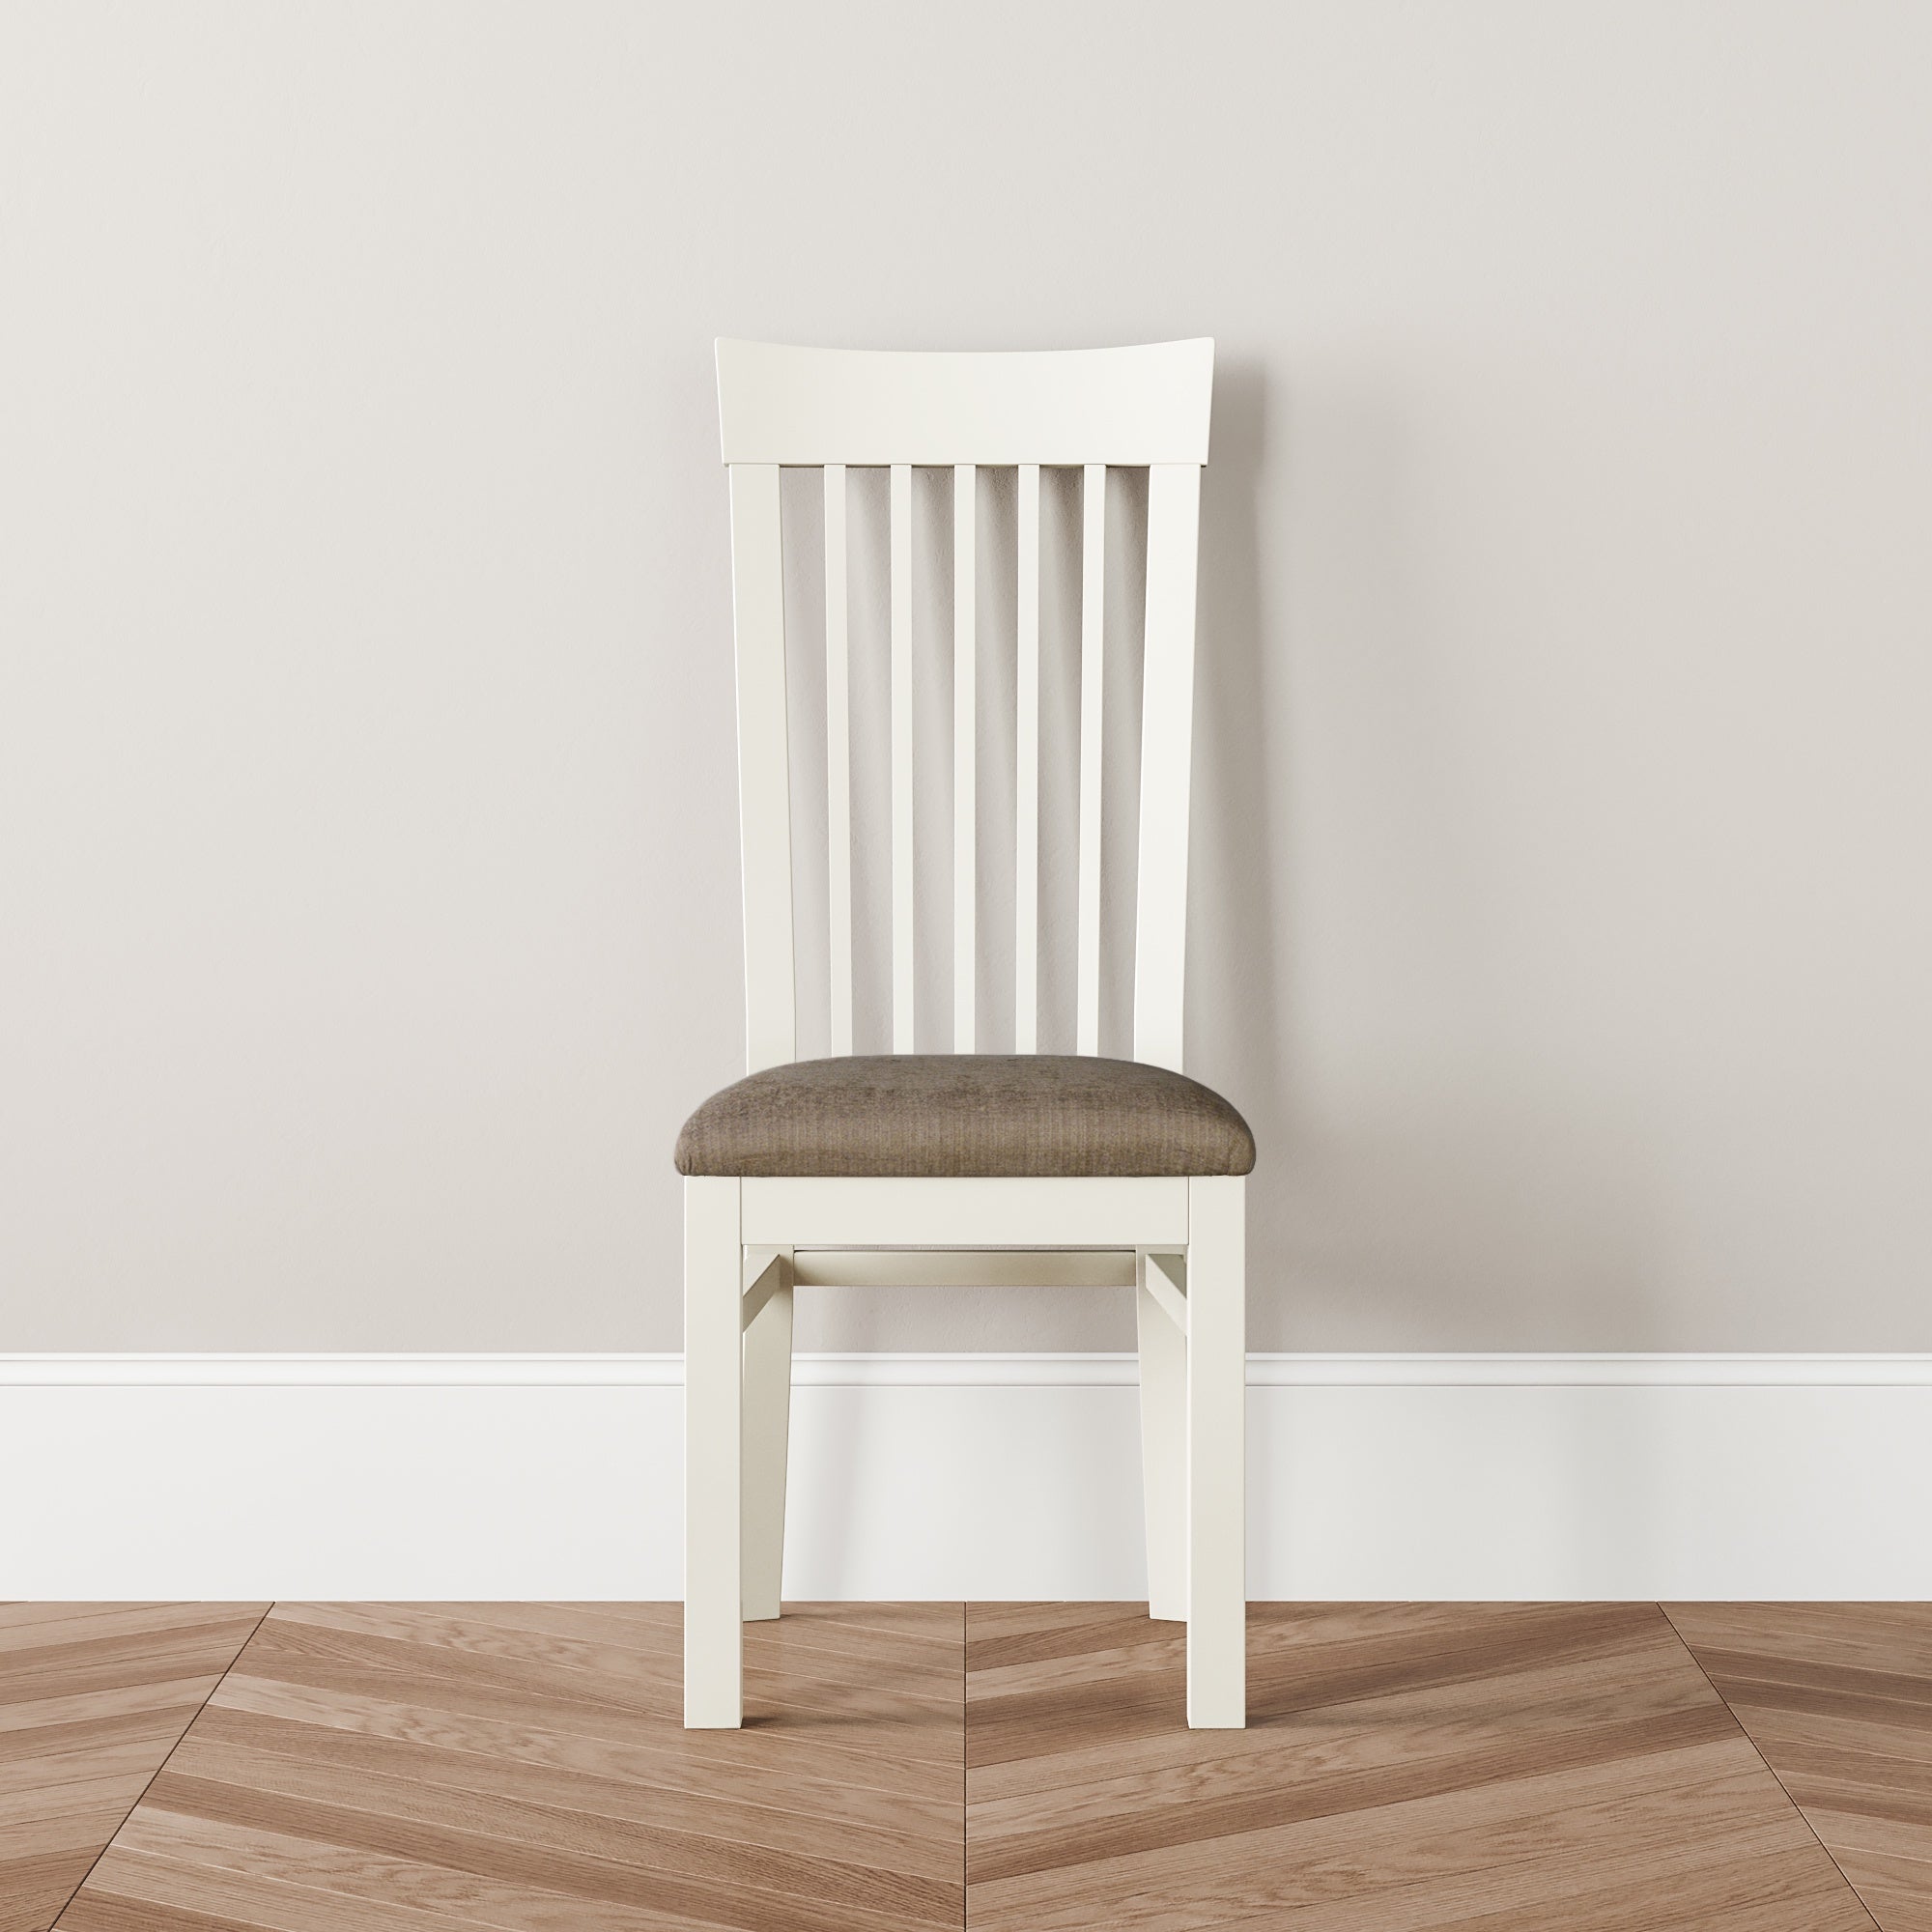 Richmond Slatted Dining Chair - Fabric Seat